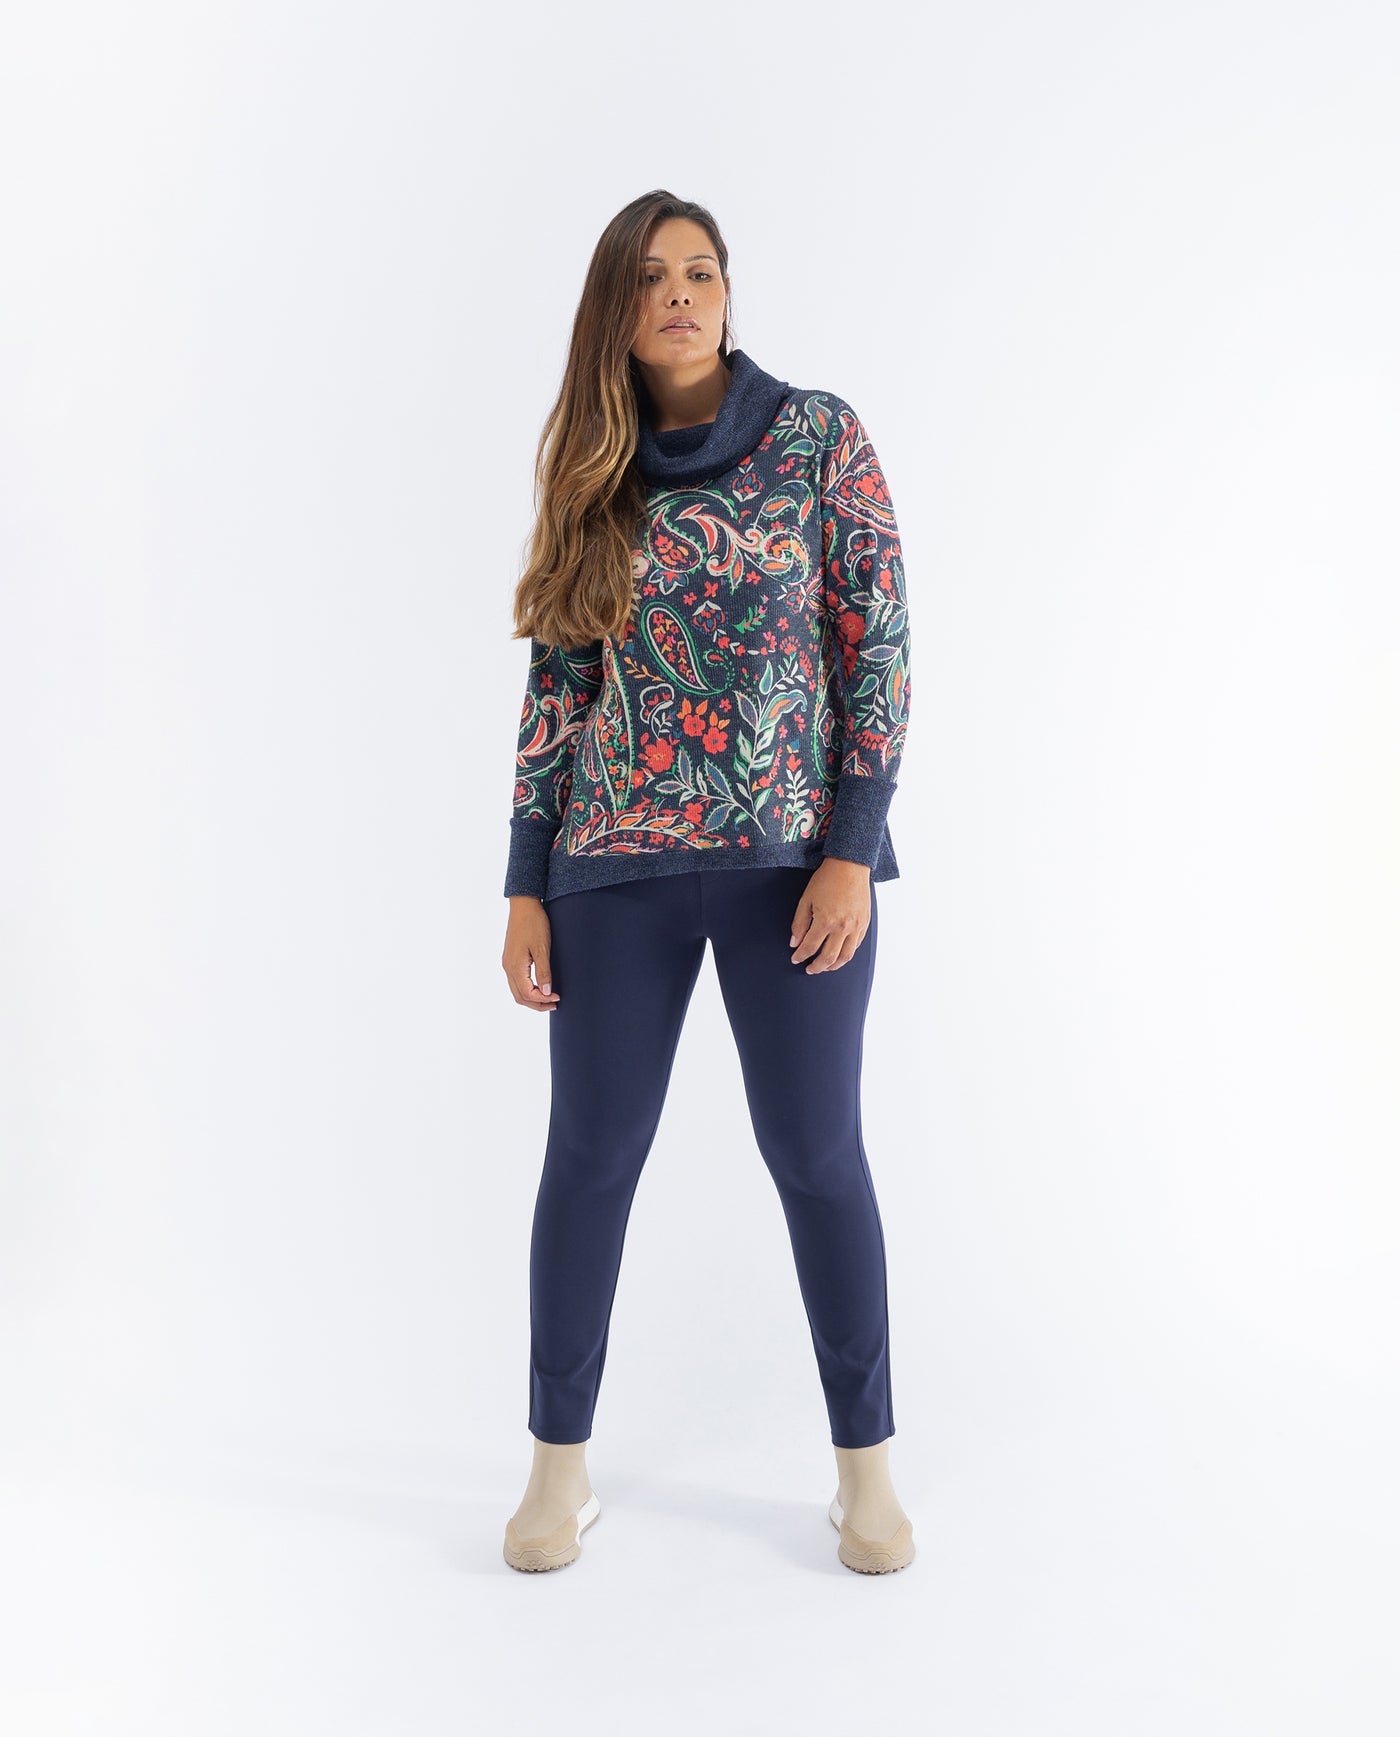 TOP WITH CASHMERE PRINT AND SMOOTH DARK BLUE CONTRASTS